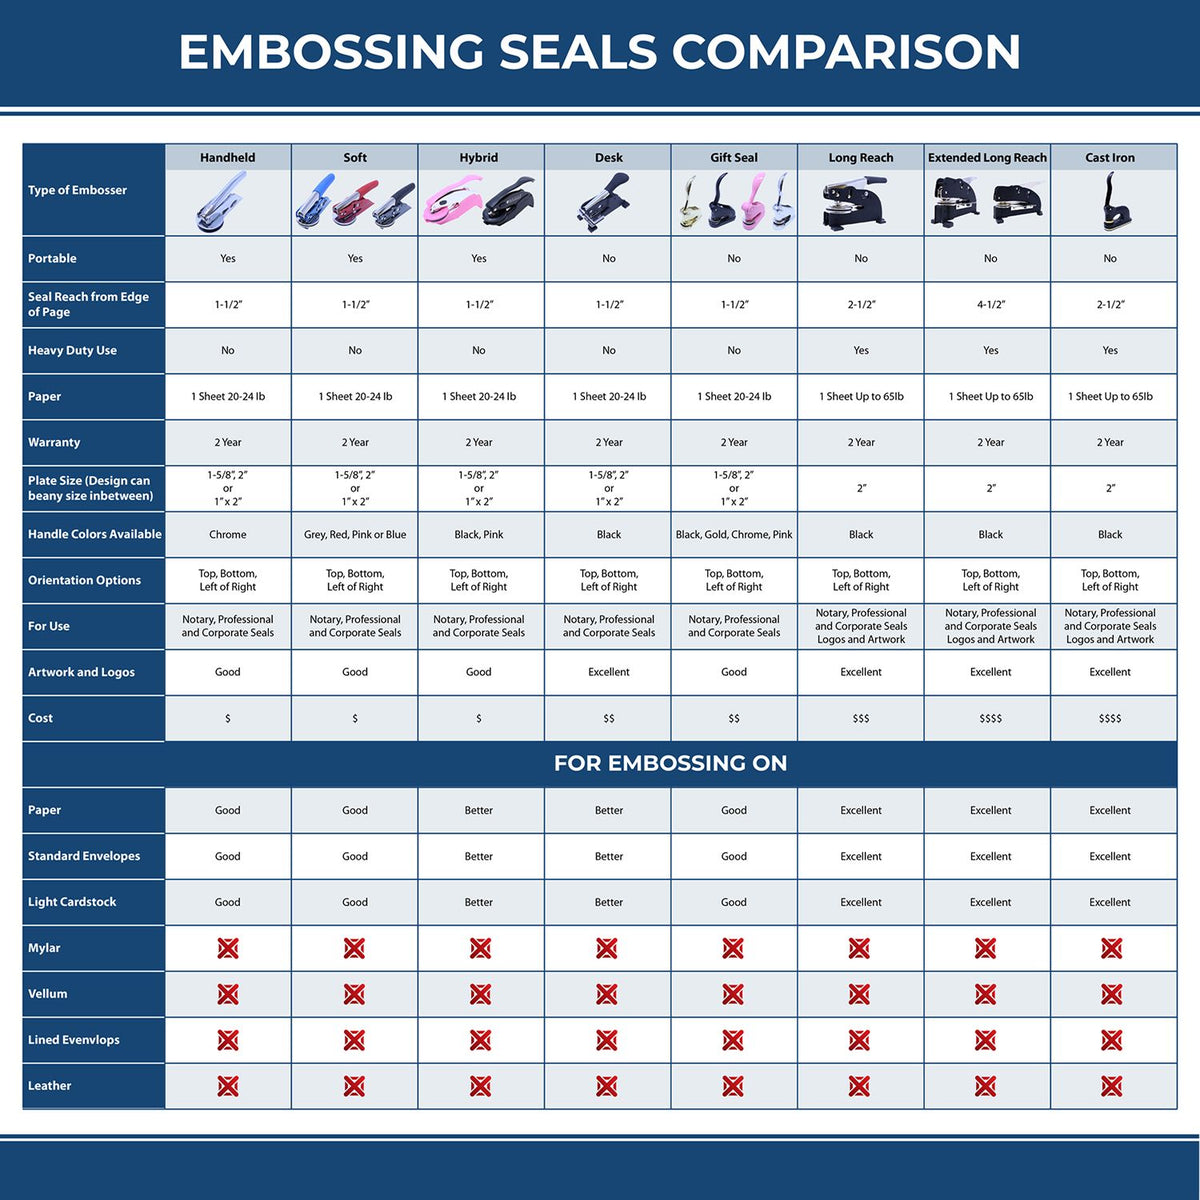 A comparison chart for the different types of mount models available for the District of Columbia Desk Architect Embossing Seal.